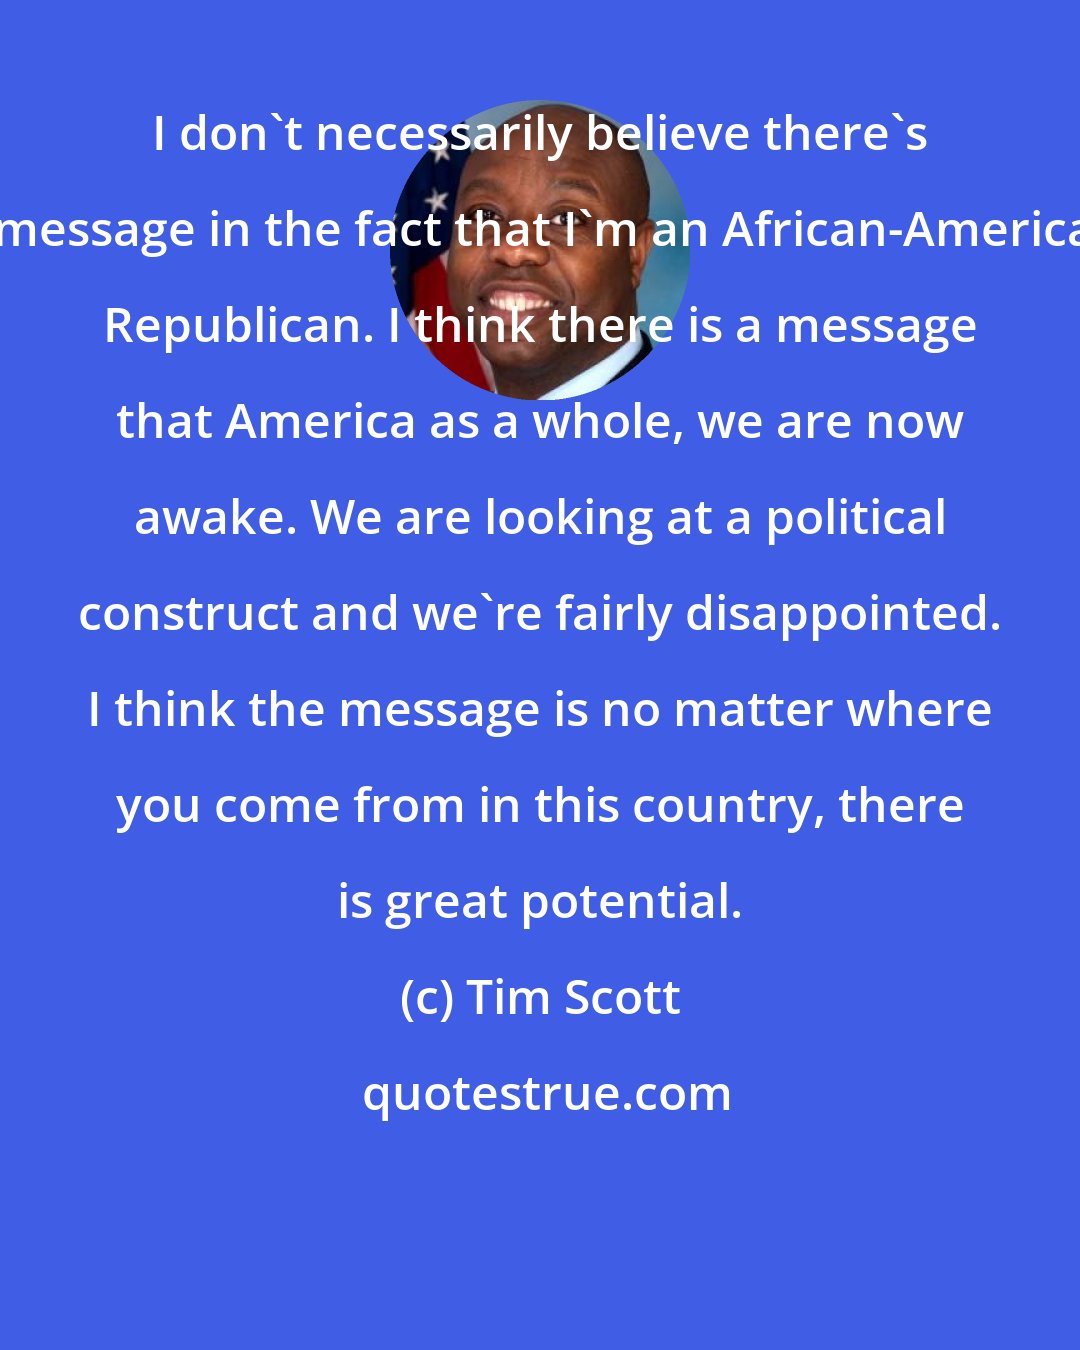 Tim Scott: I don't necessarily believe there's a message in the fact that I'm an African-American Republican. I think there is a message that America as a whole, we are now awake. We are looking at a political construct and we're fairly disappointed. I think the message is no matter where you come from in this country, there is great potential.